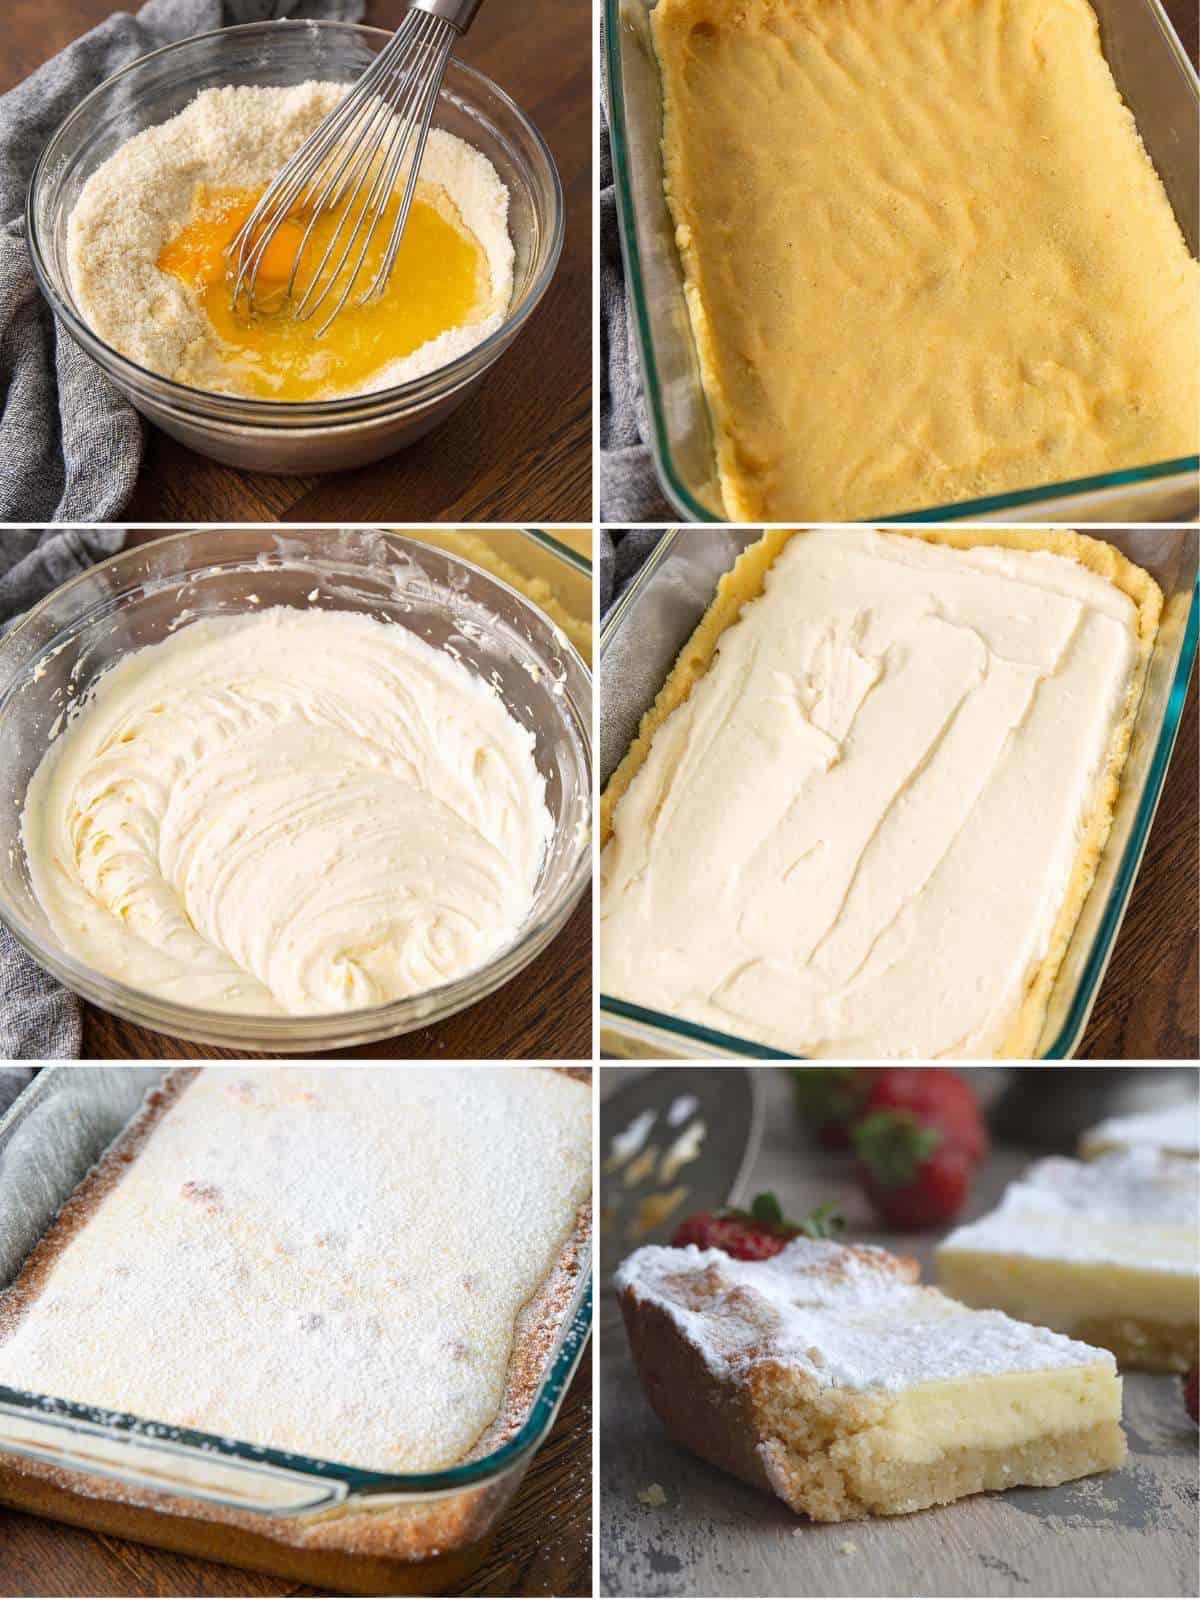 Collage of 6 images showing the steps for making Gooey Keto Butter Cake.